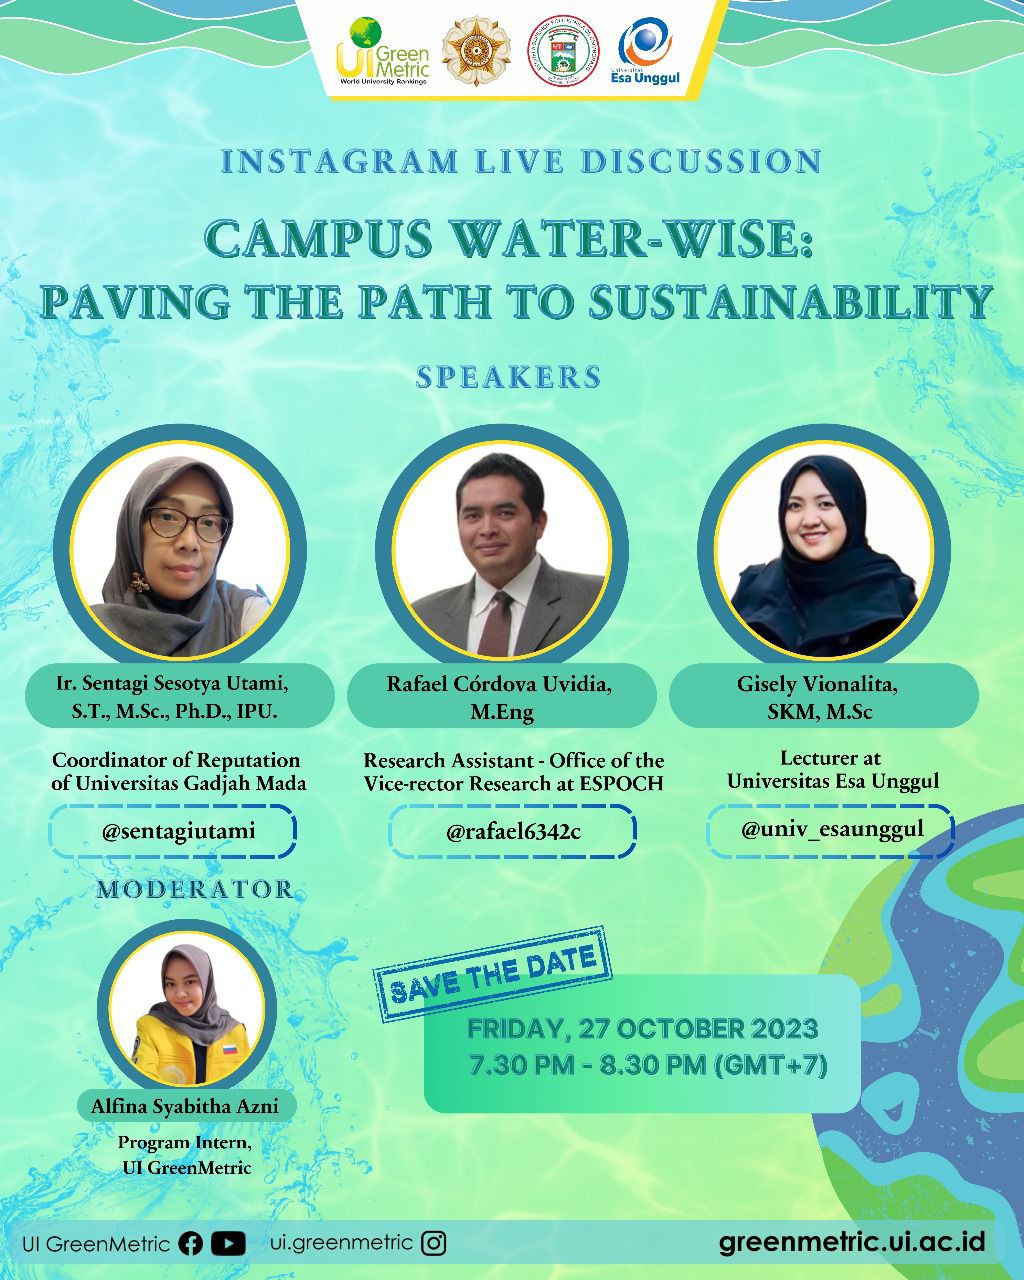 Campus-Water Rise: Paving the Path to Sustainability